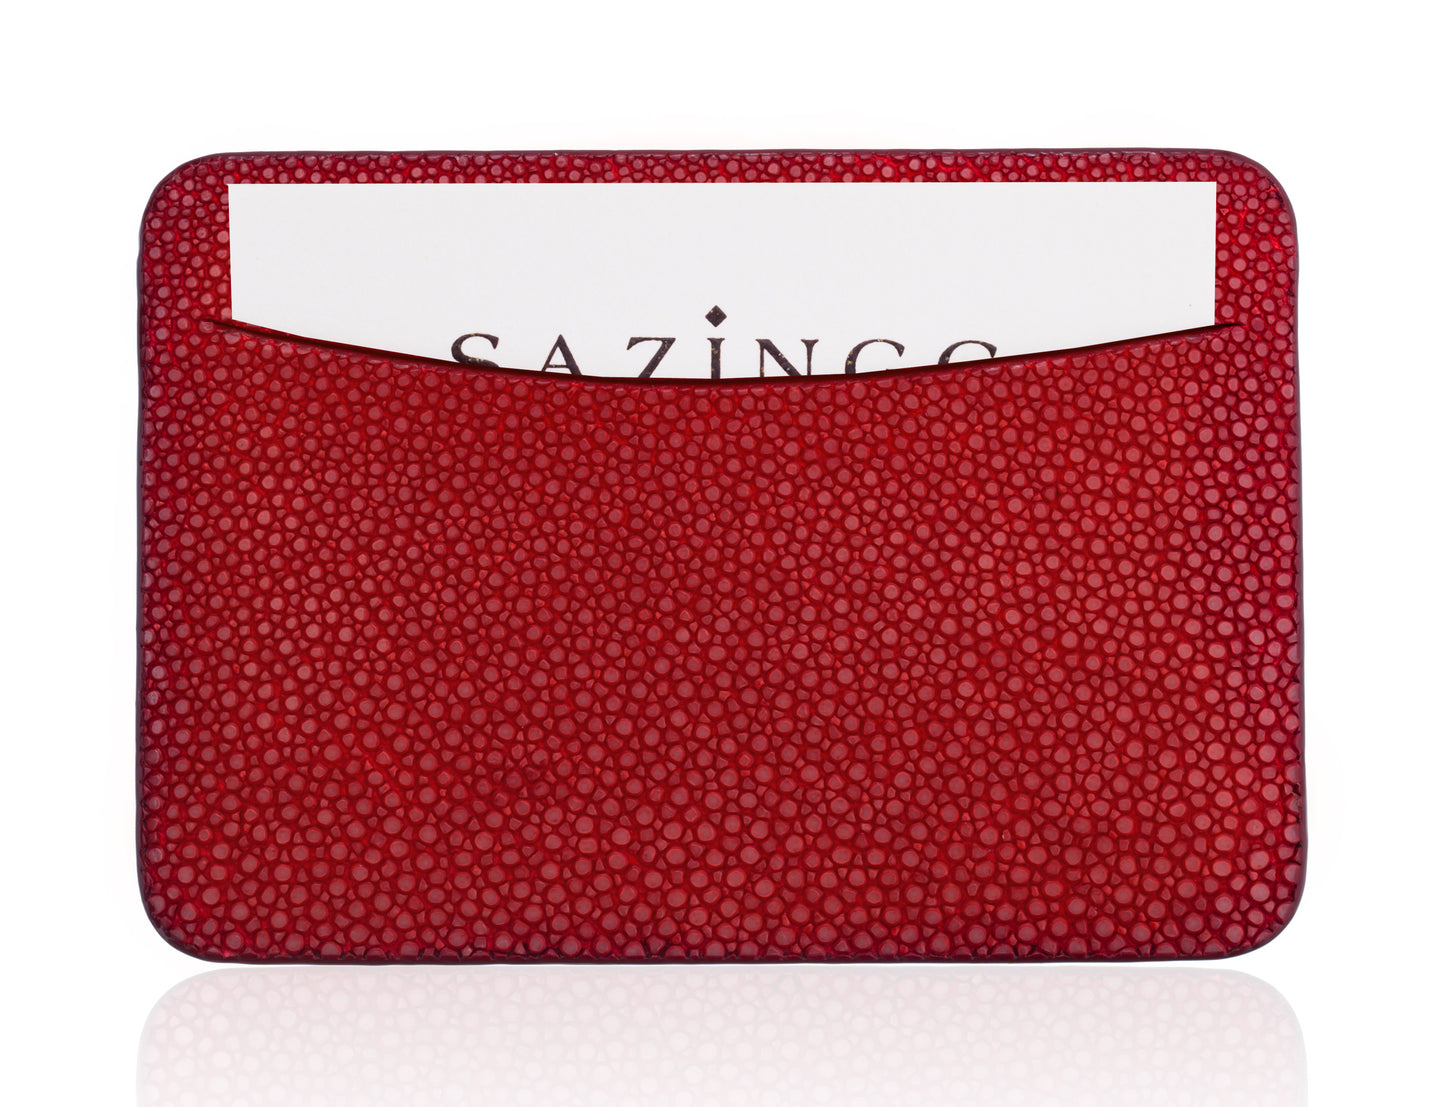 Bright Red Stingray Leather Credit Card Holder